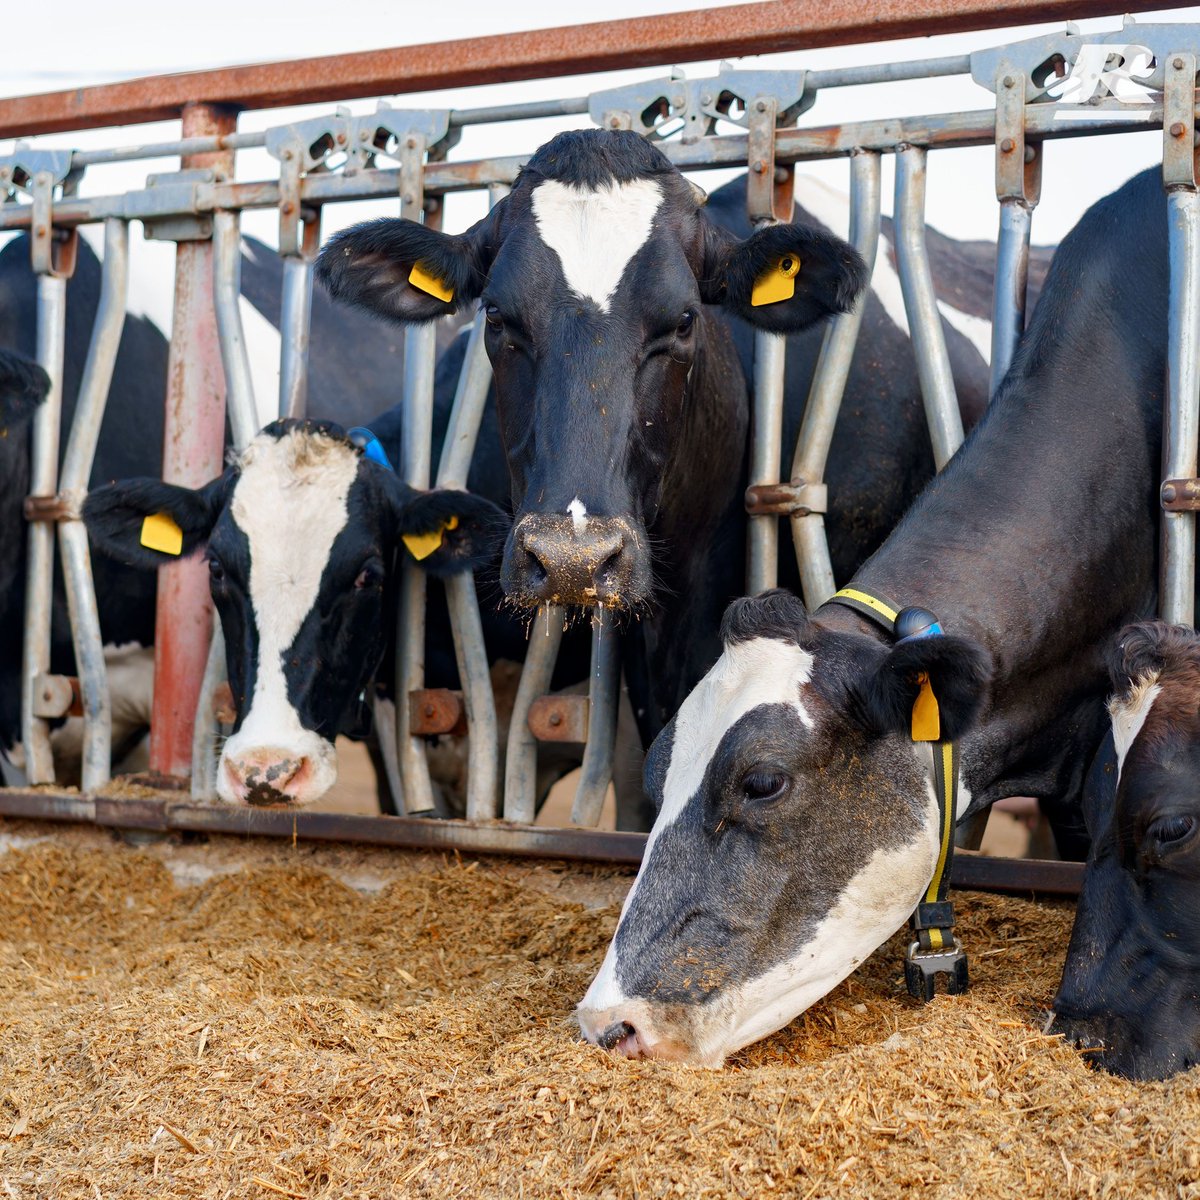 Managing dairy cows effectively involves balancing rations to prevent Sub Acute Ruminal Acidosis (SARA). Recent research highlights the critical role of diet composition in preventing SARA and maintaining optimal rumen health. 🐮🌾 bit.ly/reid-sara
#DairyFarming #FarmTips